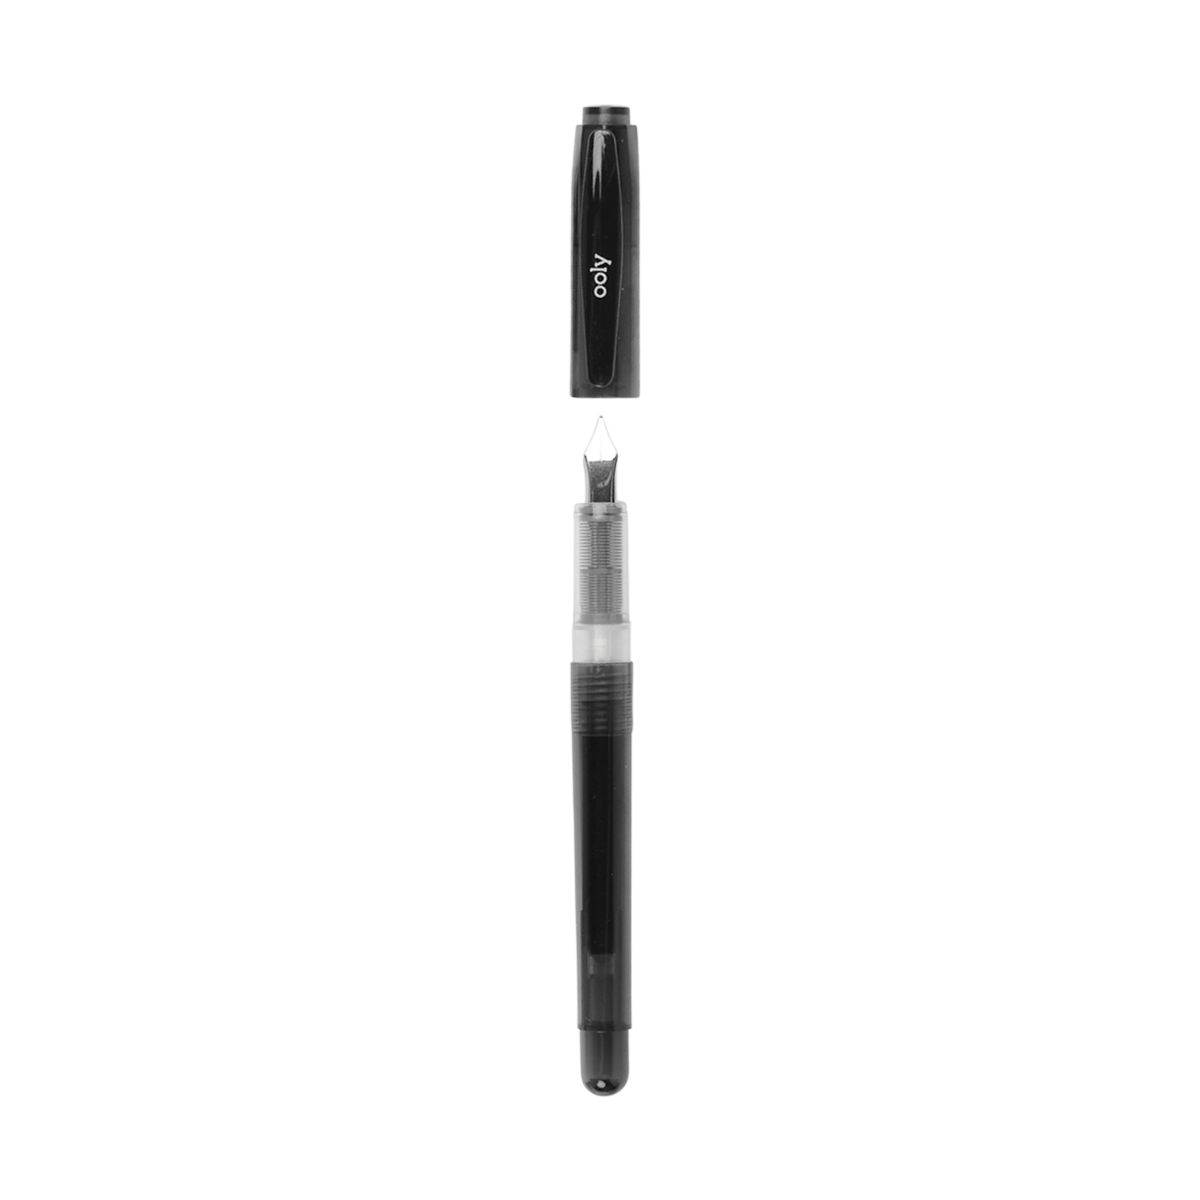 Black ink Splendid Fountain Pen with cap removed